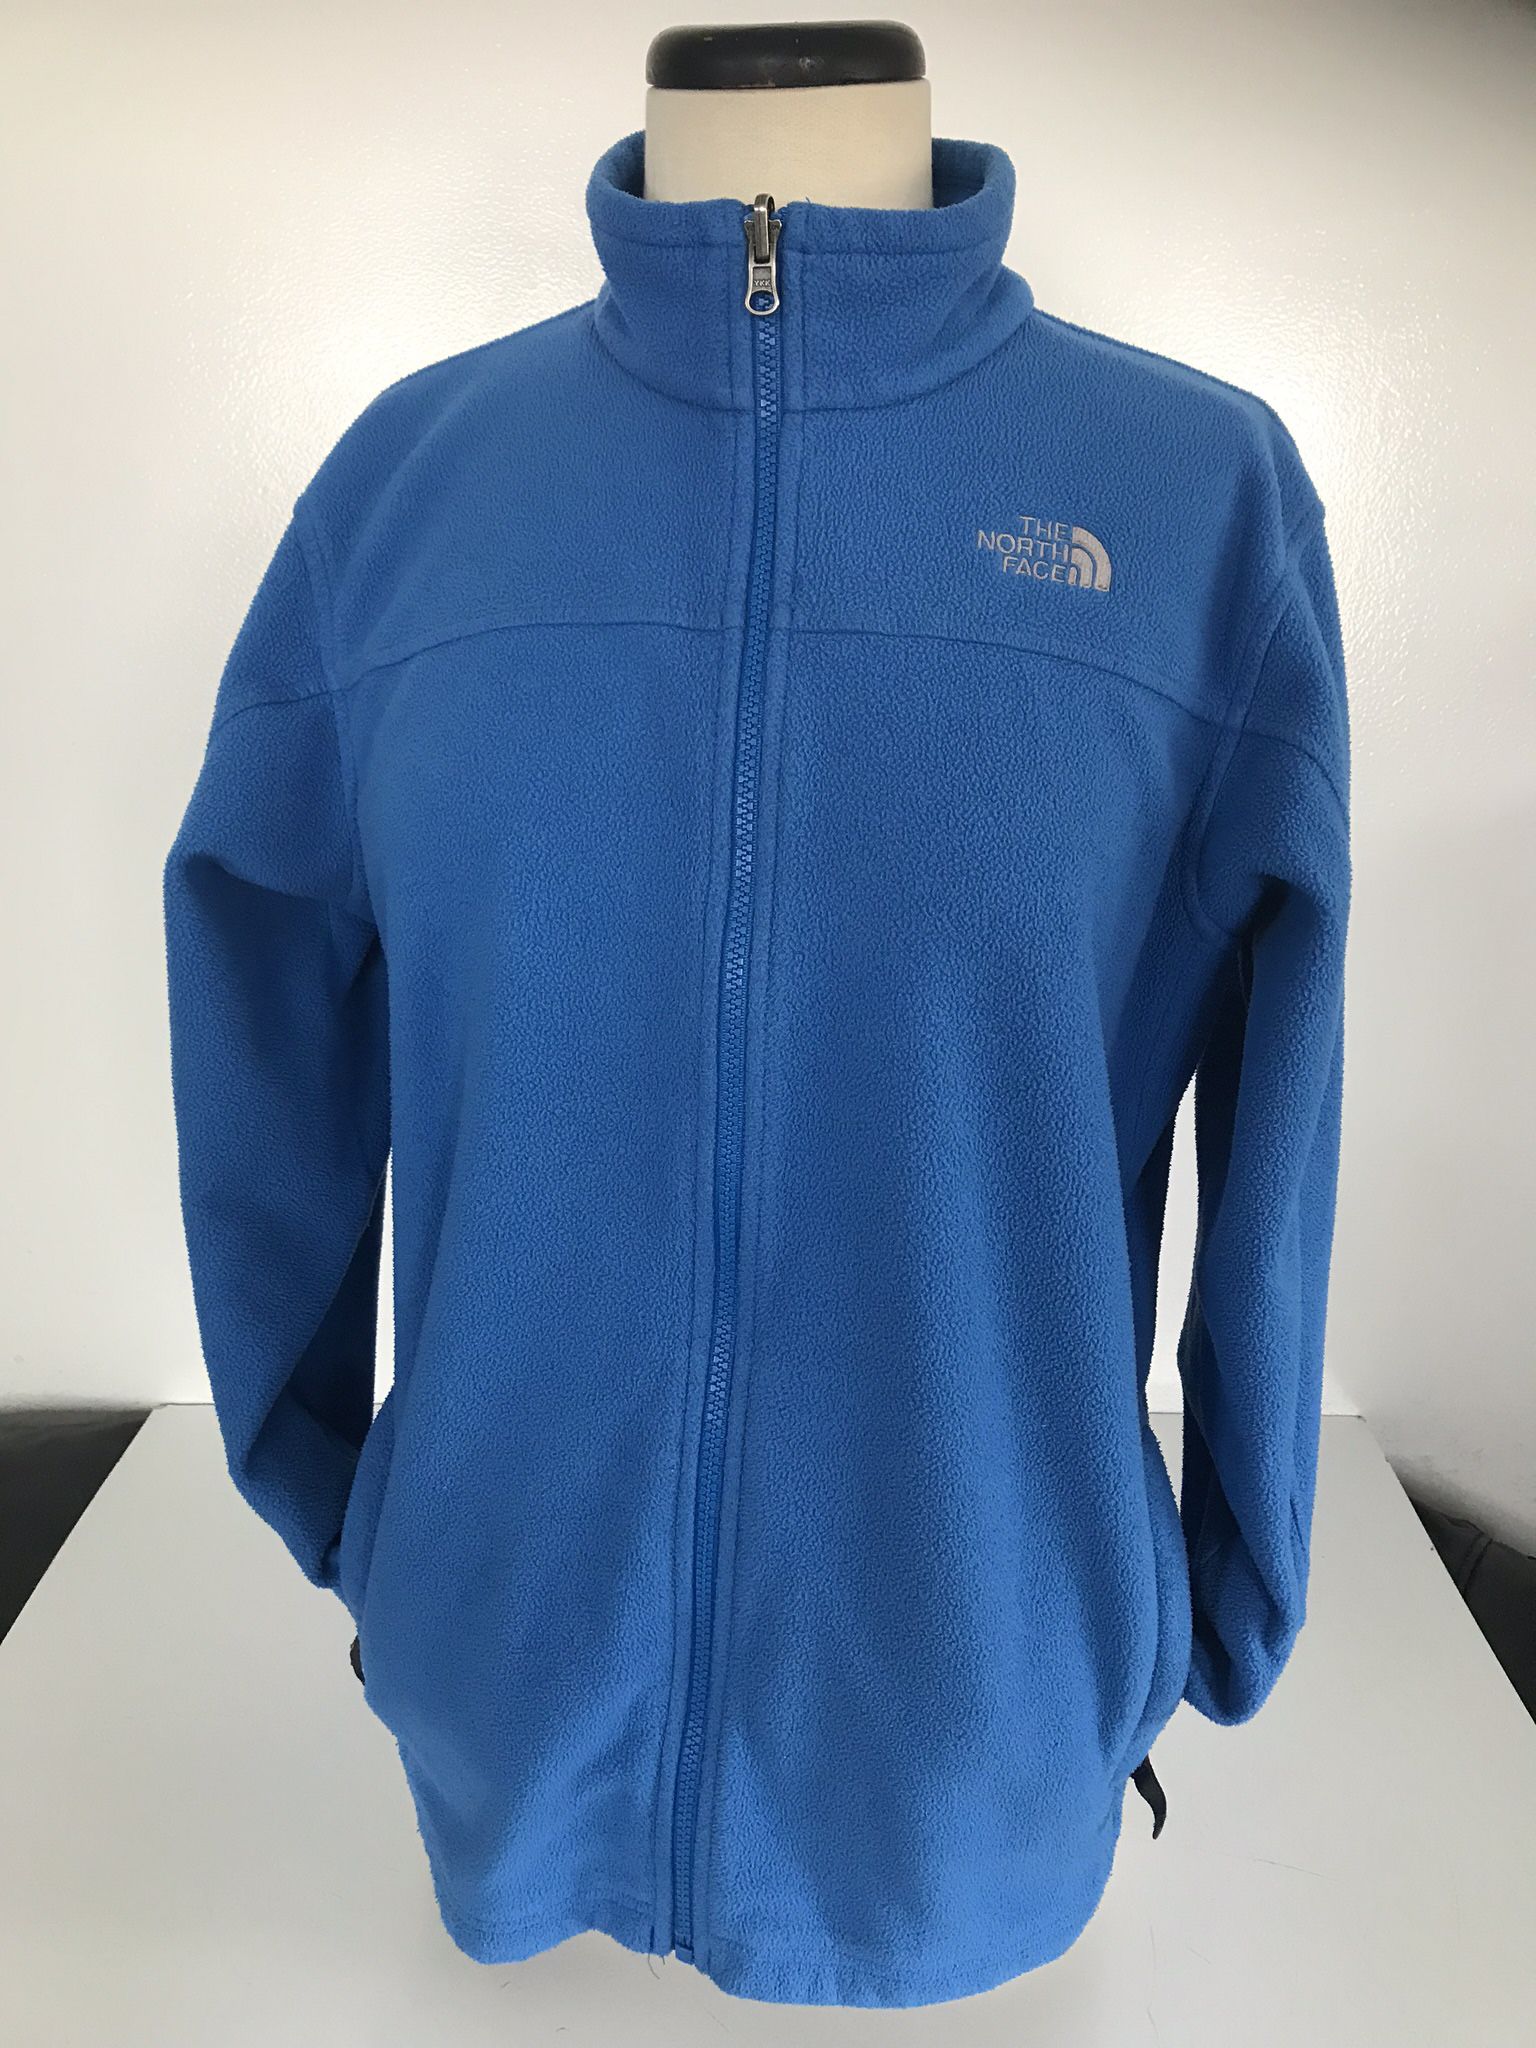 The North Face fleece jacket size boy’s XL 18/20 years old